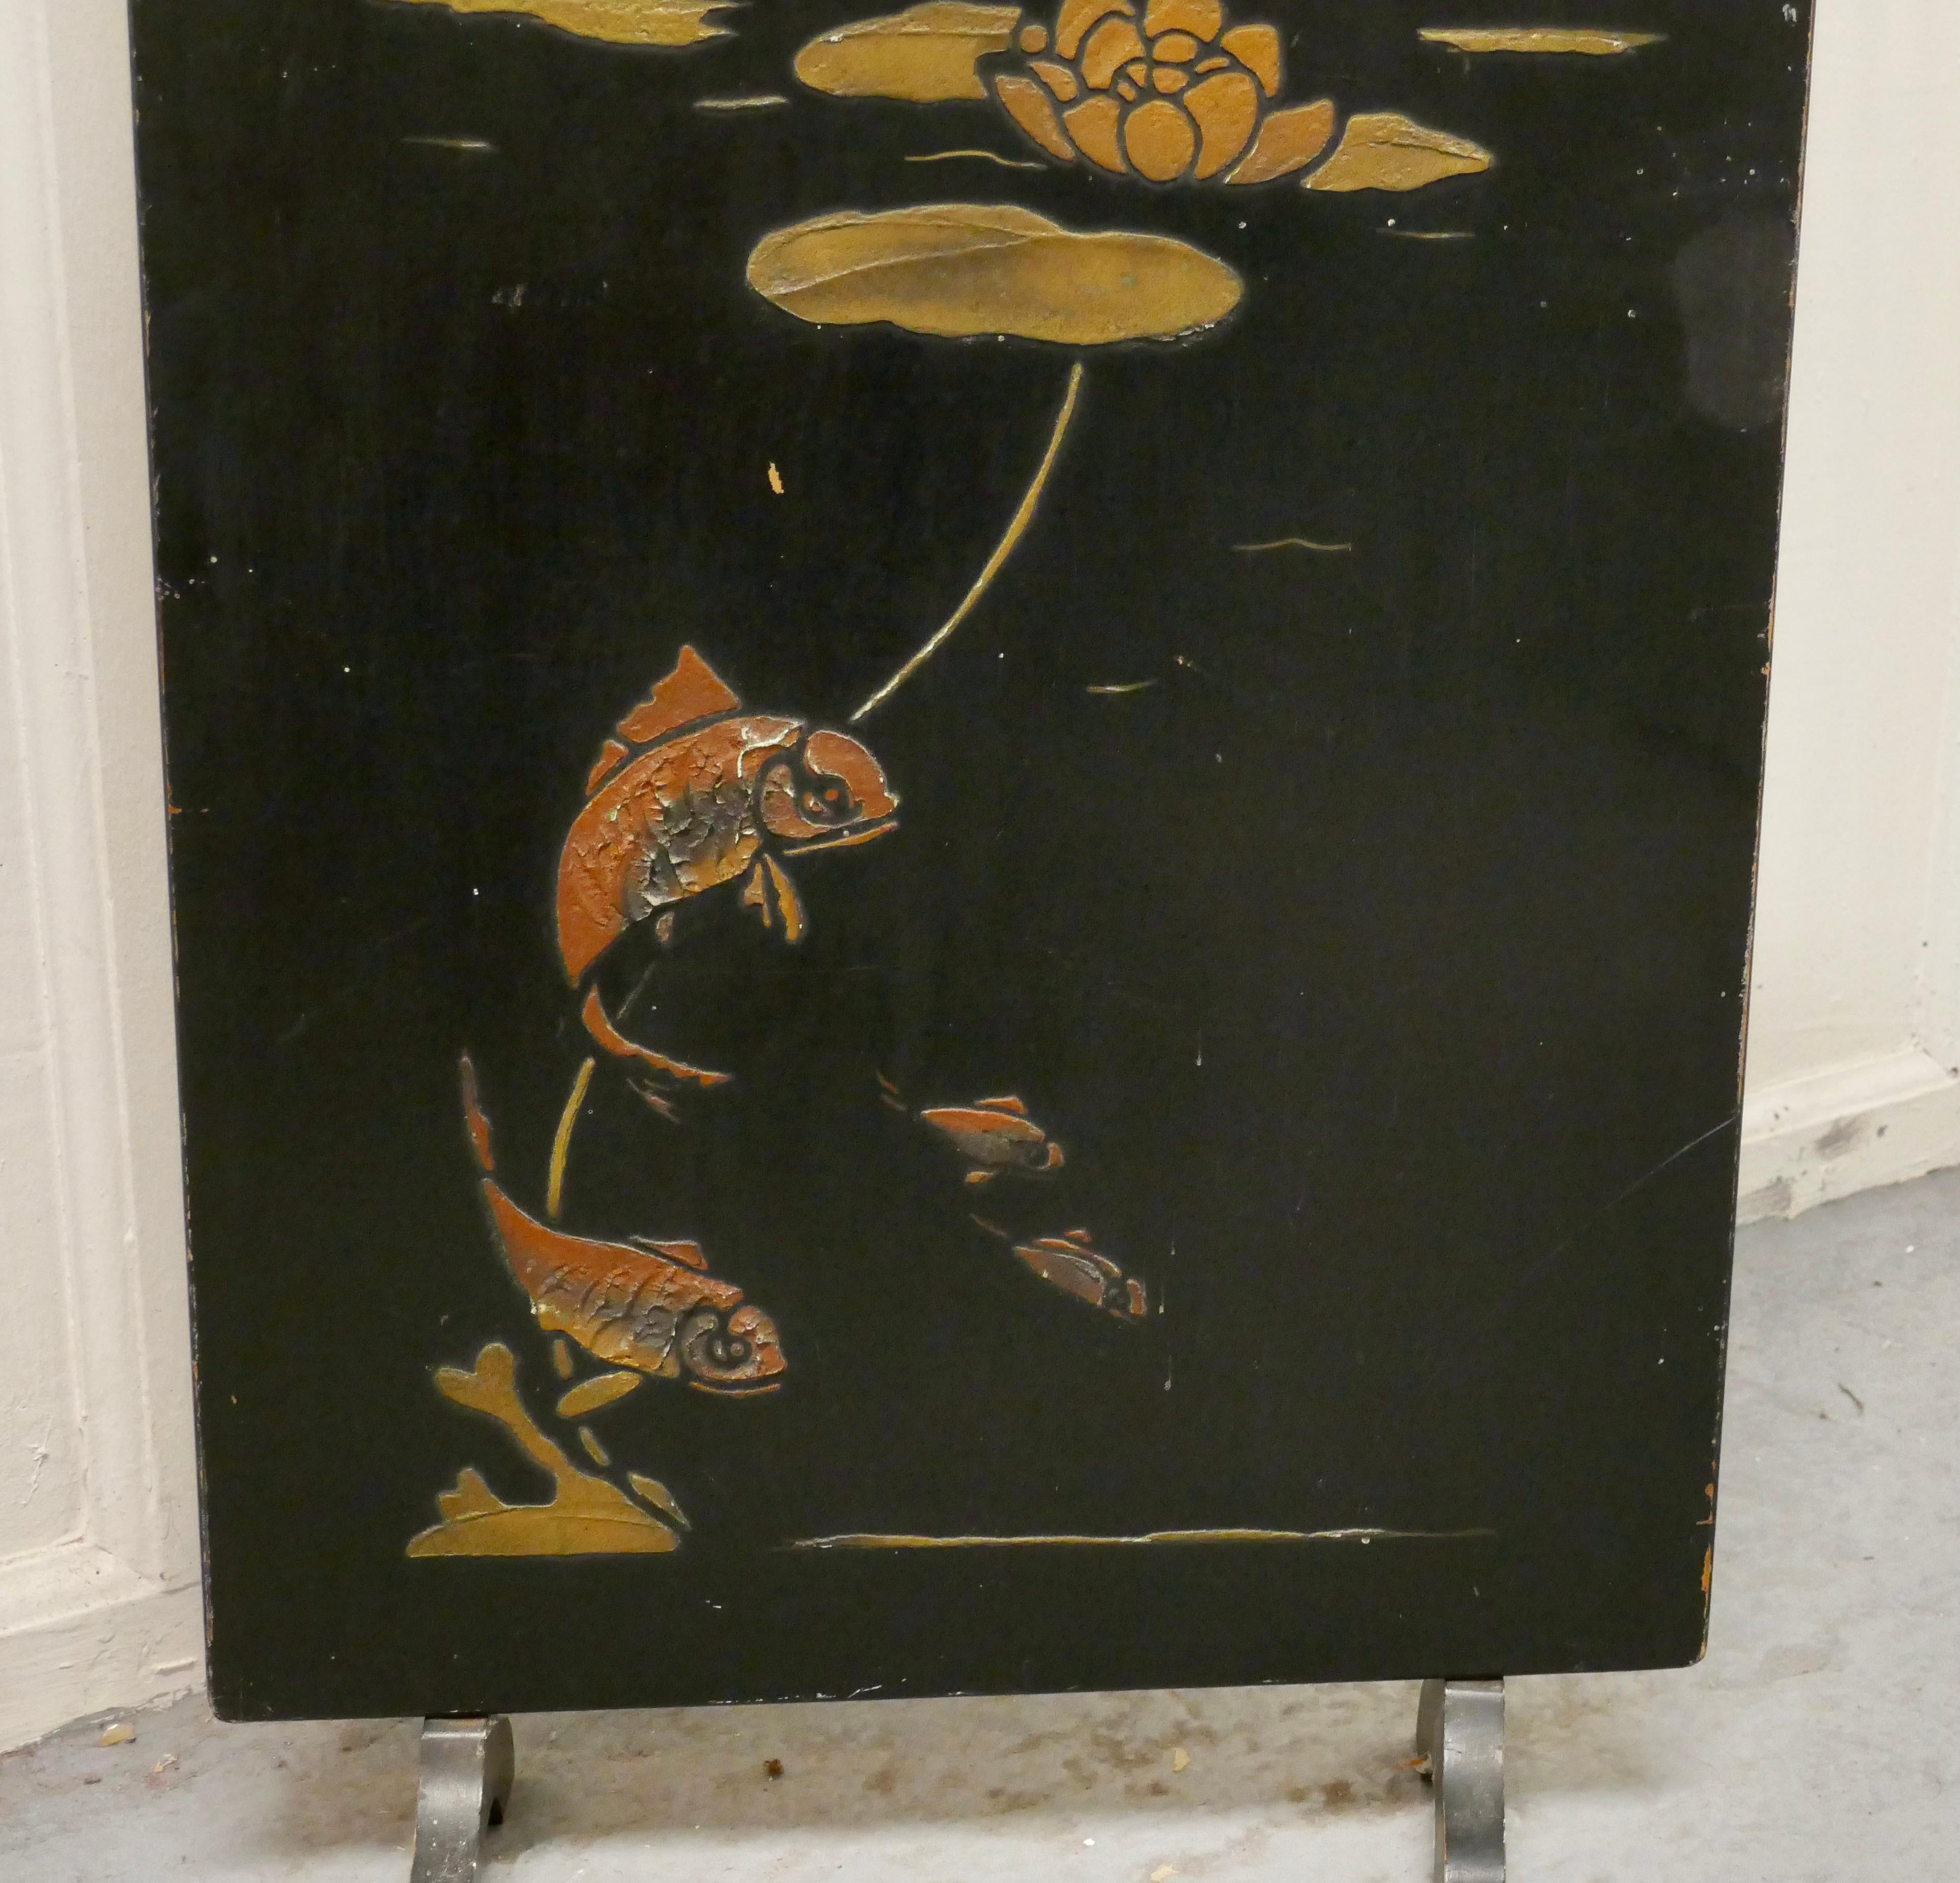 19th century Japanese lacquer fire Ssreen, decorated with carp

The screen has lacquered panels with embossed decoration of carp for good luck swimming breneath a lilly pad

The screen is in slightly distressed finish but otherwise sound
The